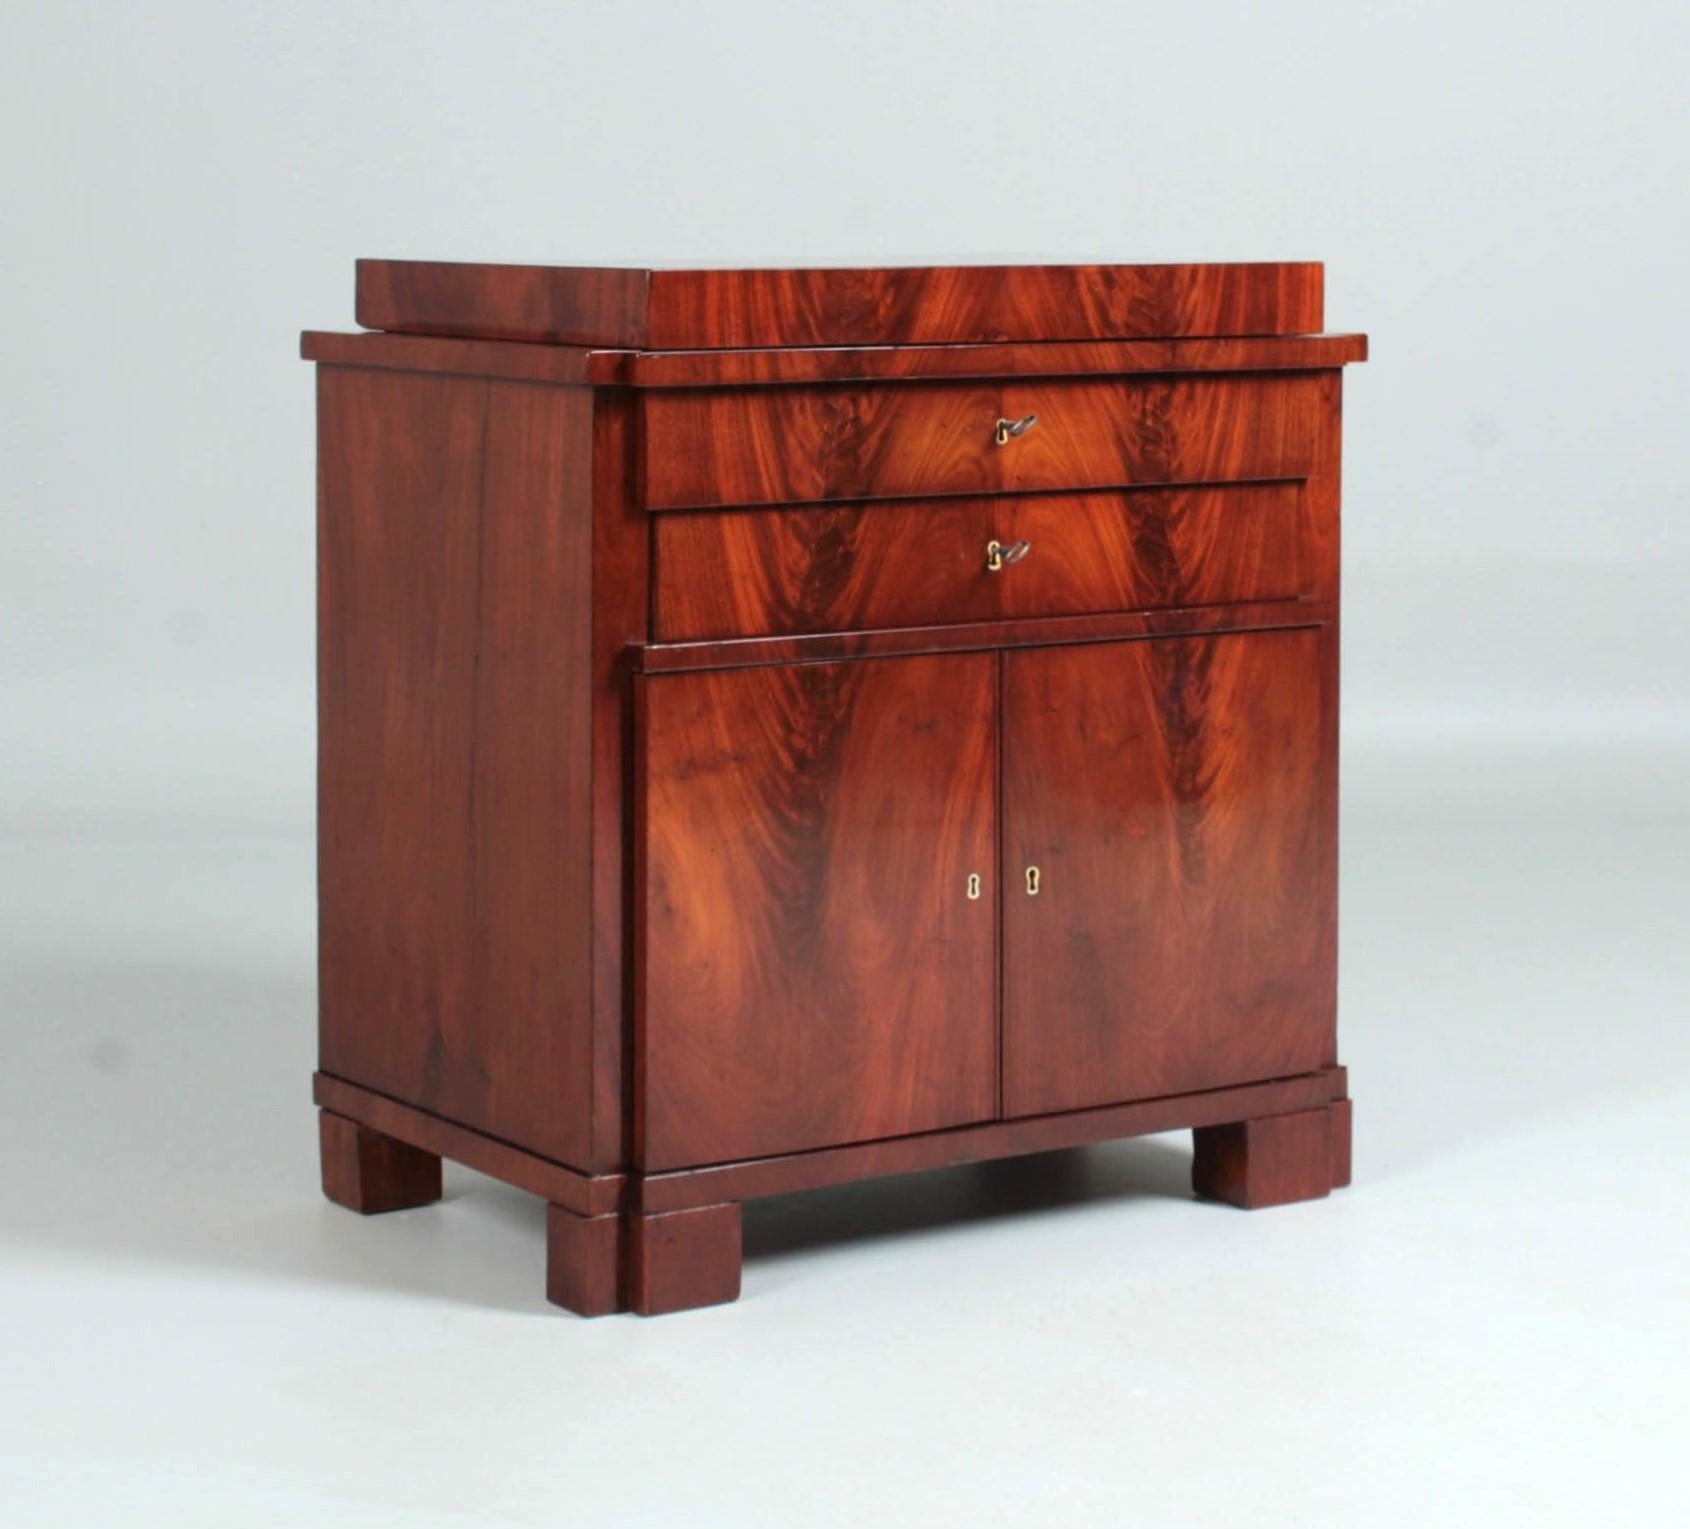 Small Biedermeier commode

North Germany
Biedermeier around 1830

Dimensions: H x W x D: 82 x 77 x 51 cm

Description:
Strictly cubist Biedermeier furniture with unusual function.

When closed, we see a small half cabinet with two doors at the